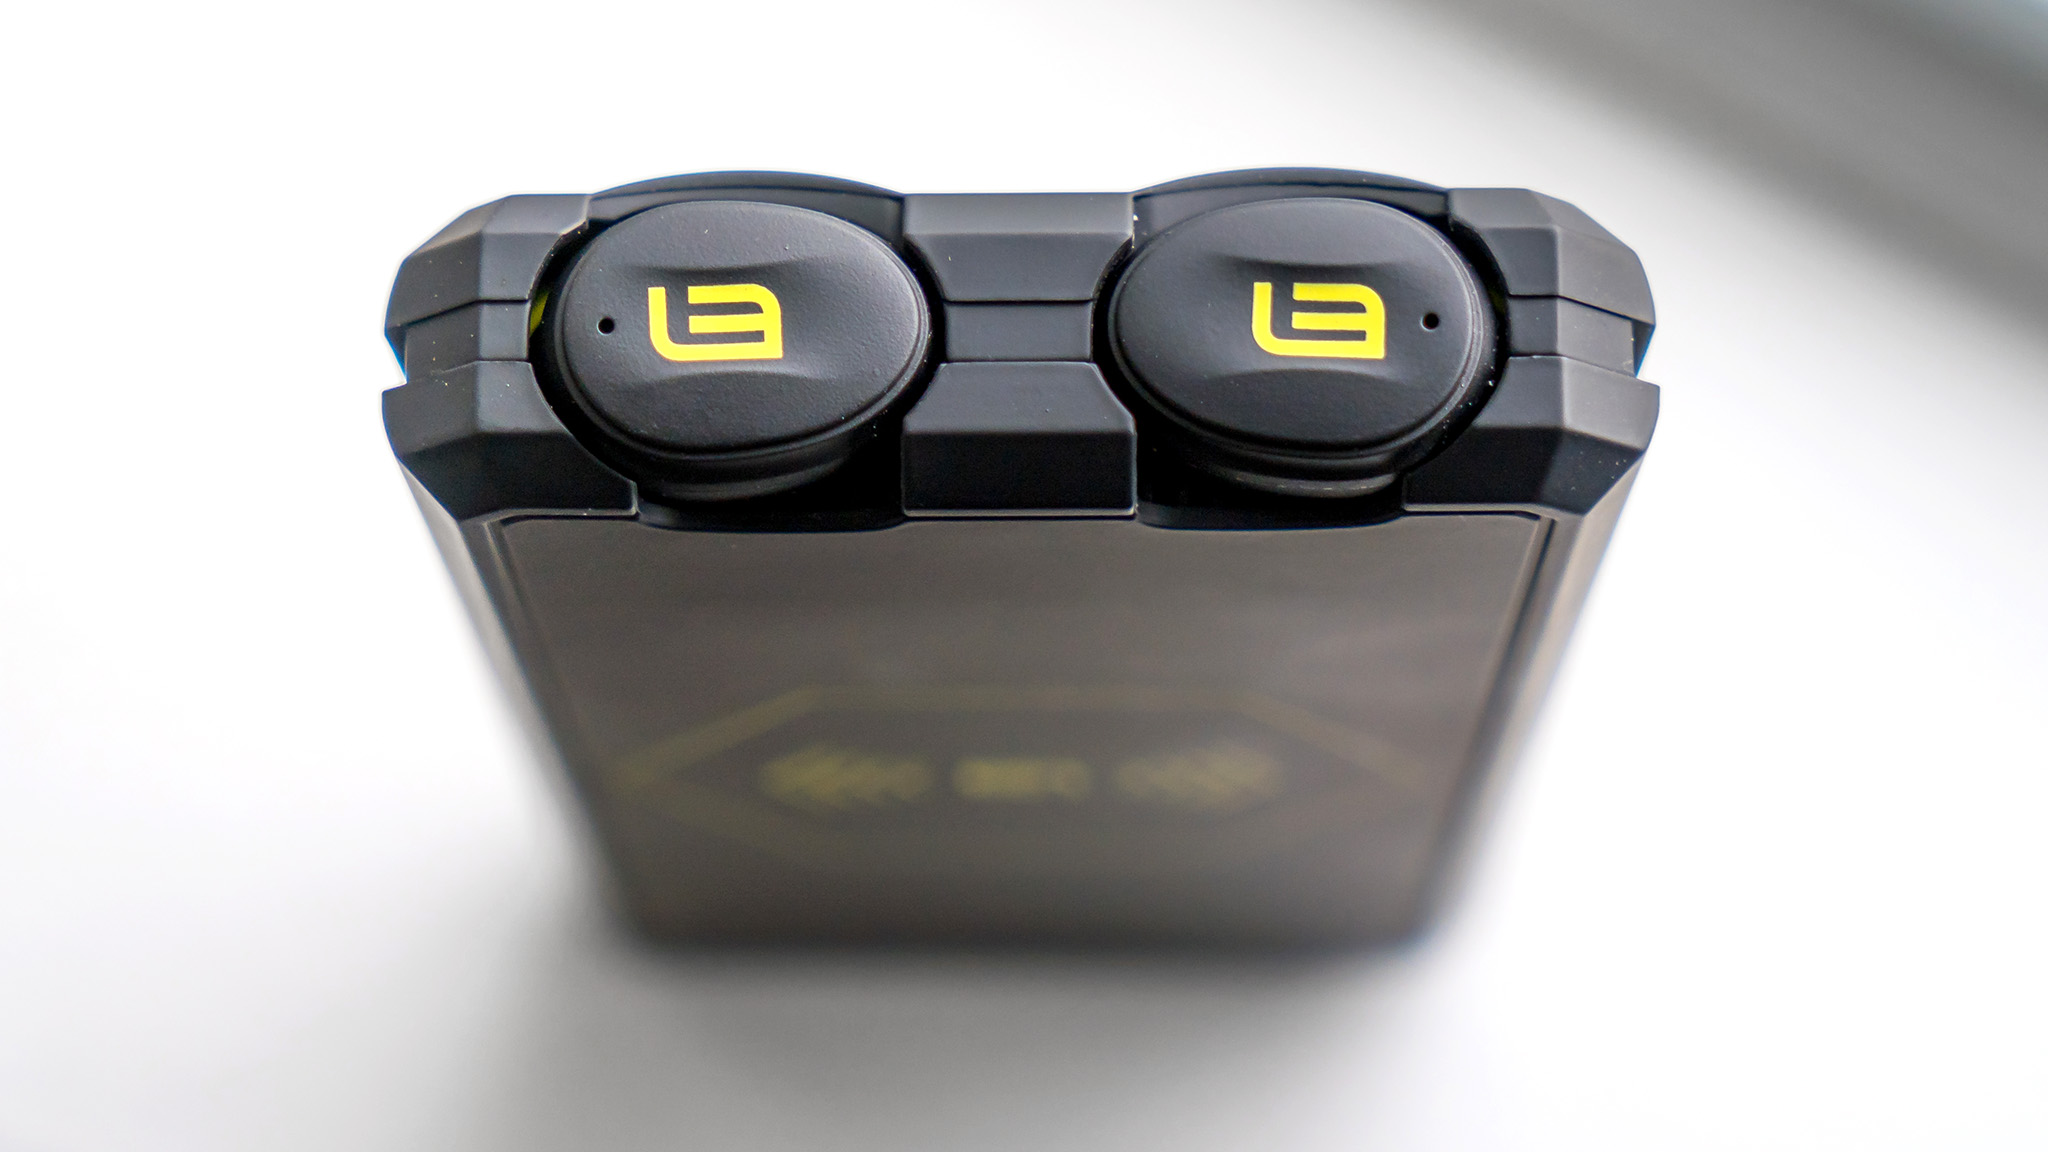 LinearFlux HyperSonic 360 earbuds from above.